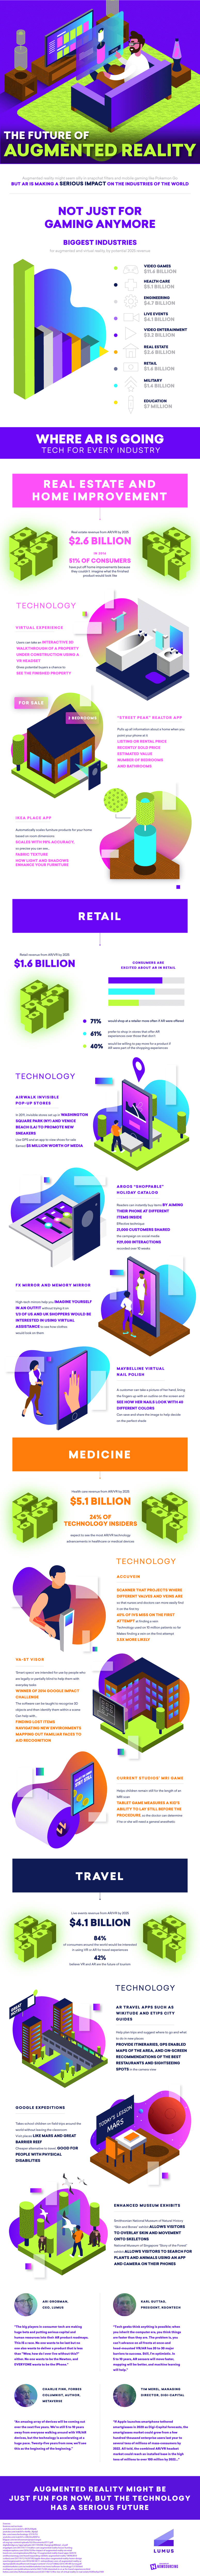 Augmented Reality Trends - #infographic